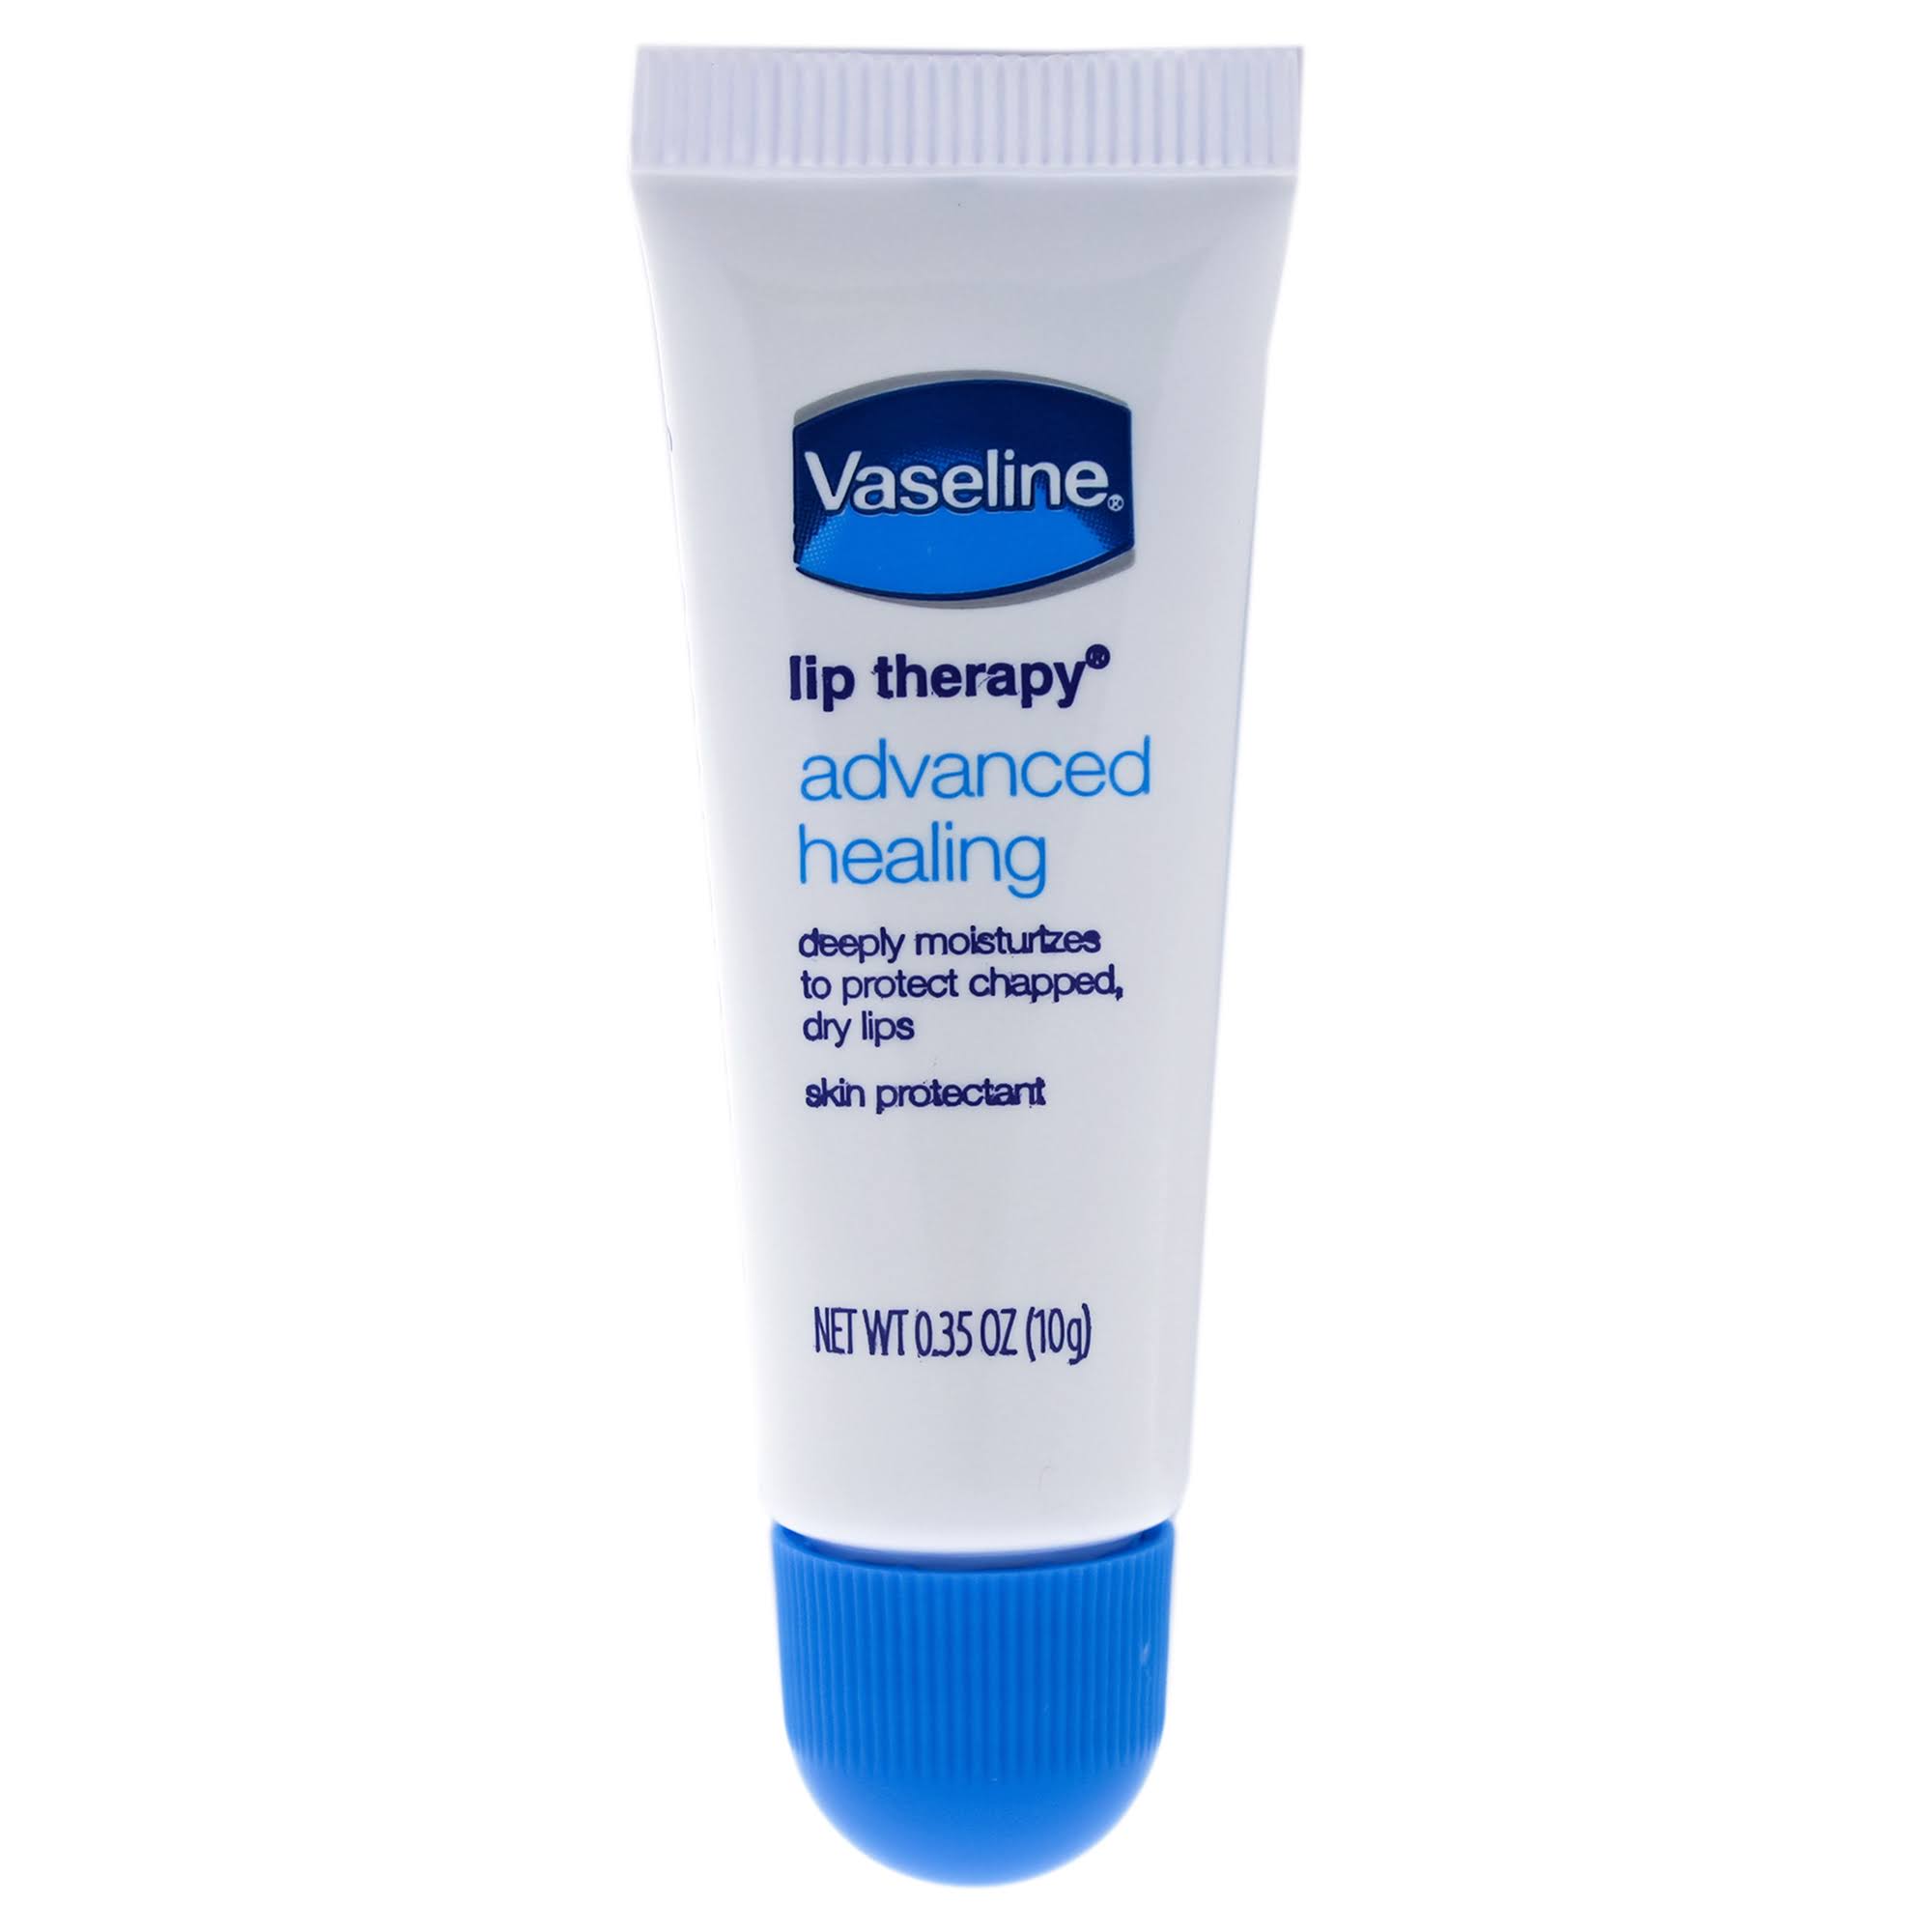 Vaseline Lip Therapy Advanced Formula 0.35 oz - Buy Packs and Save (Pack of 4)